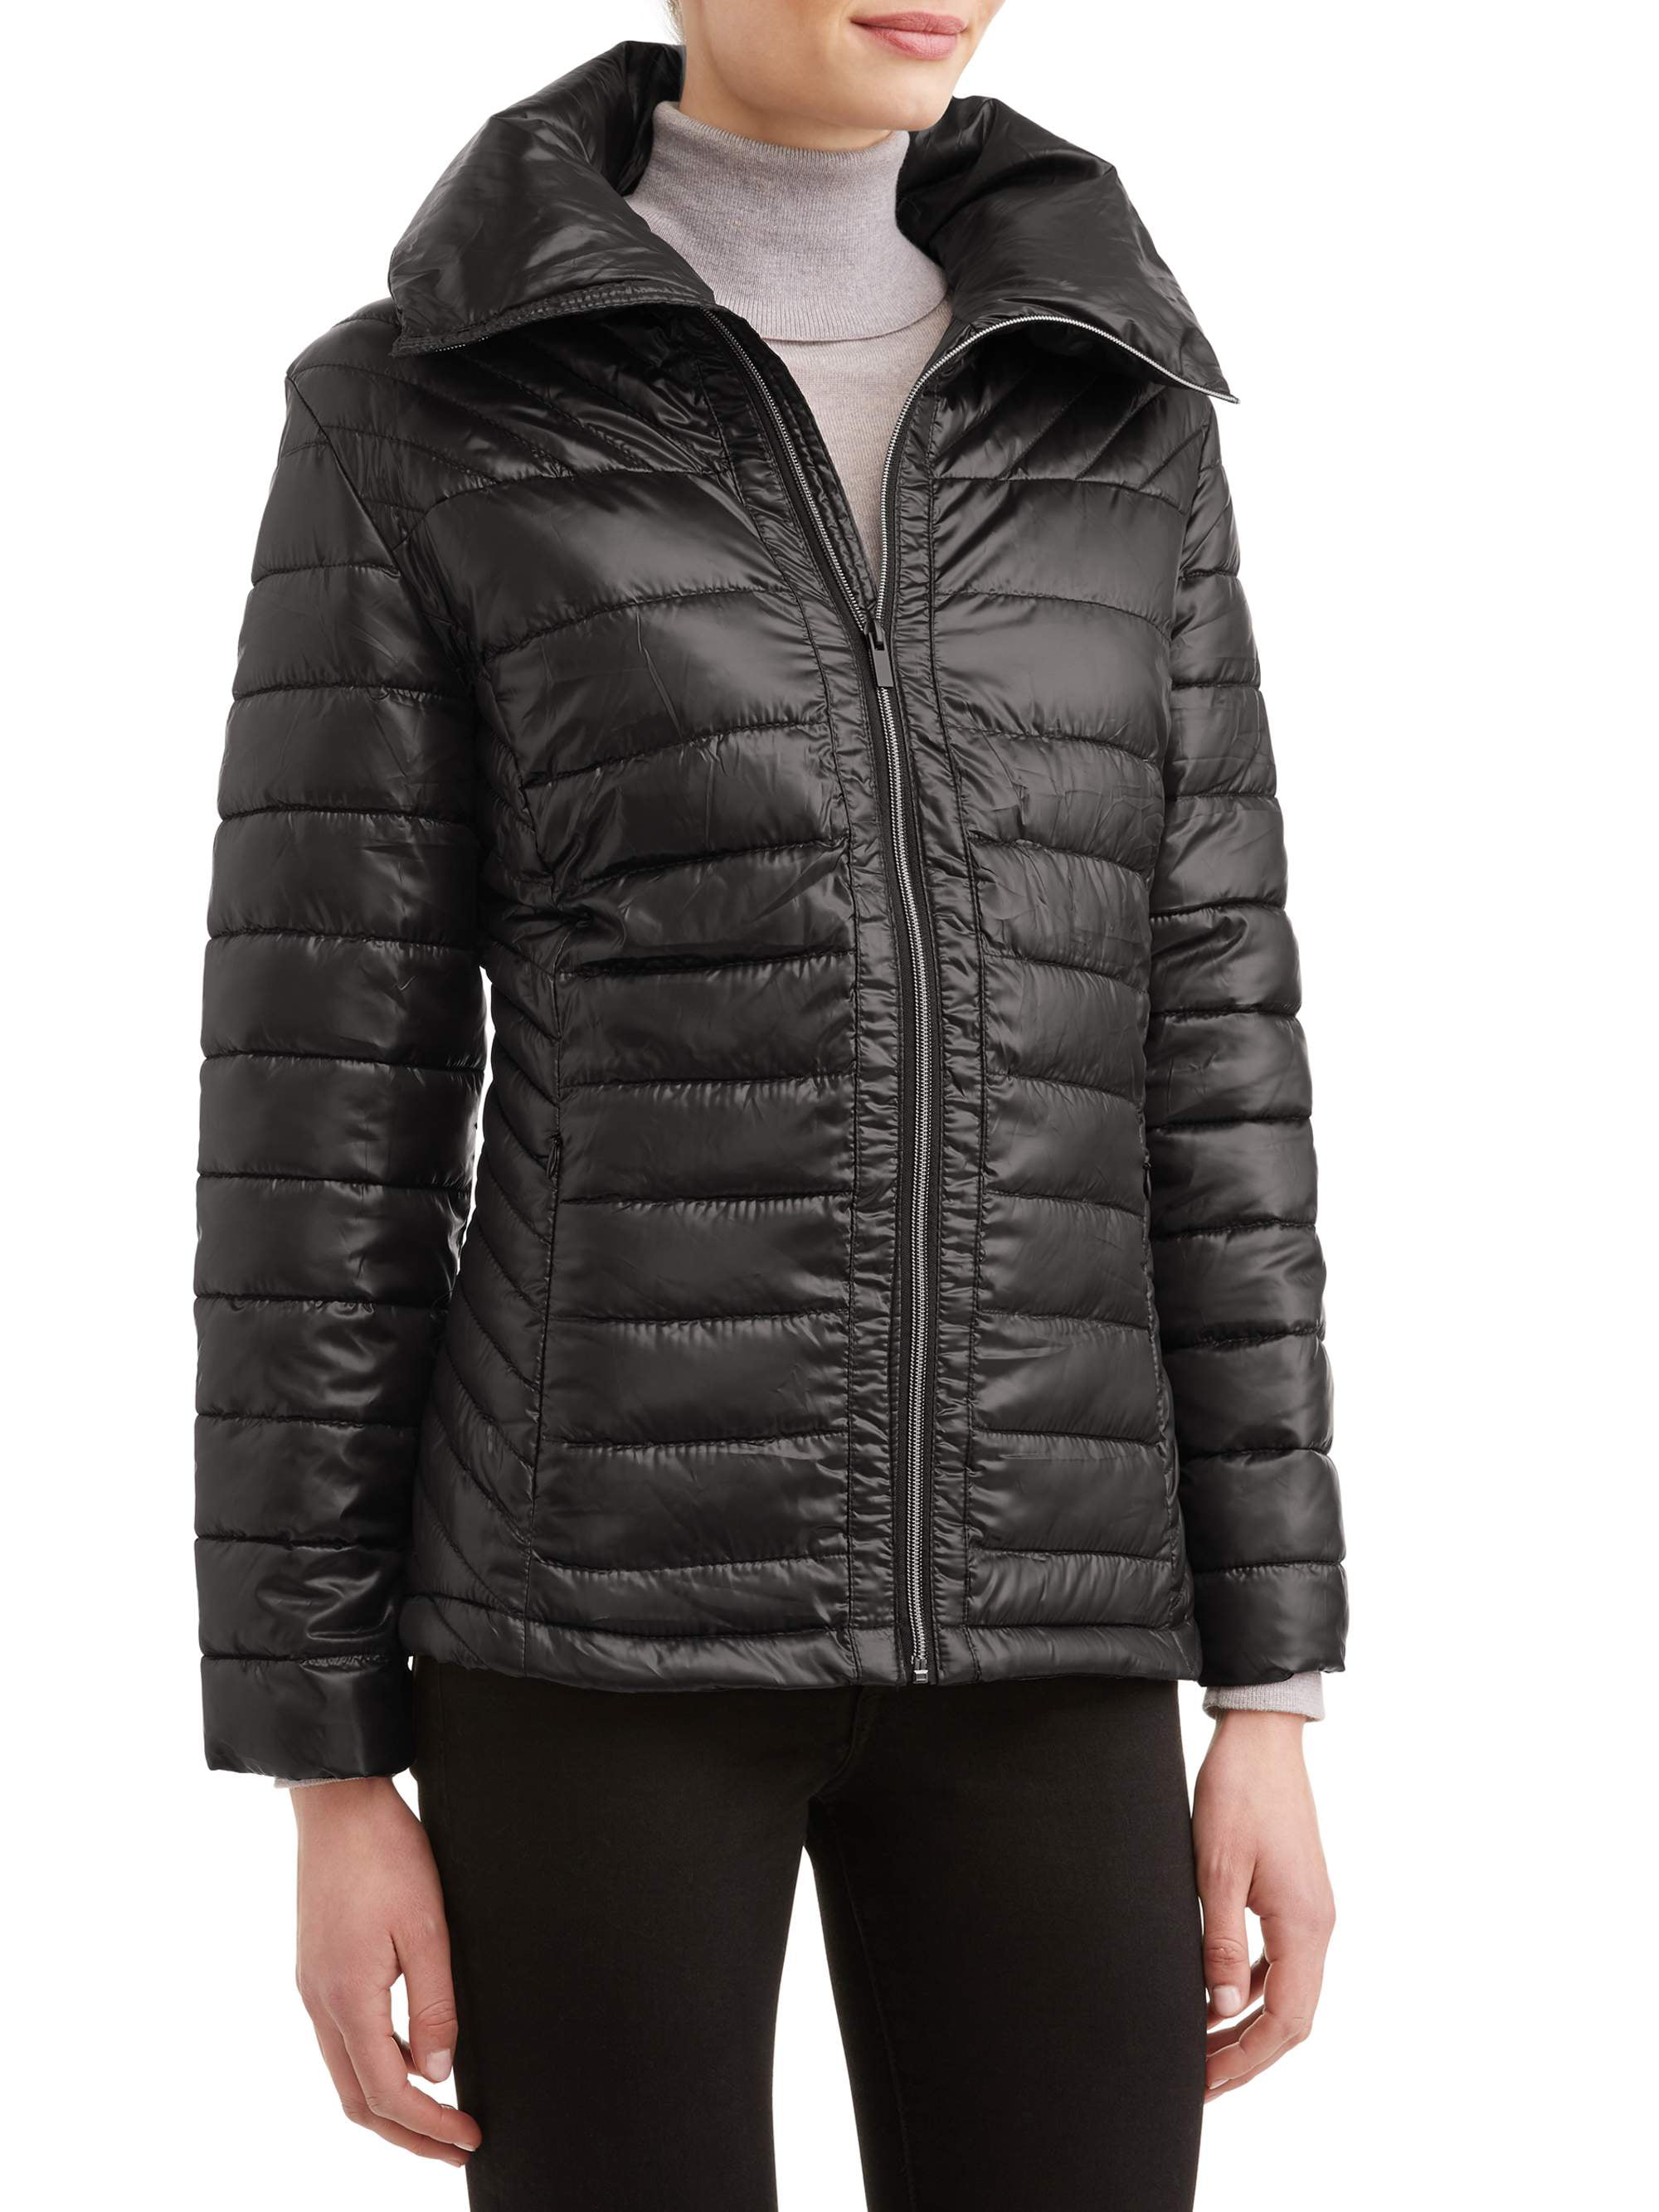 Women's Down Blend Quilted Jacket with Convertible Collar - Walmart.com